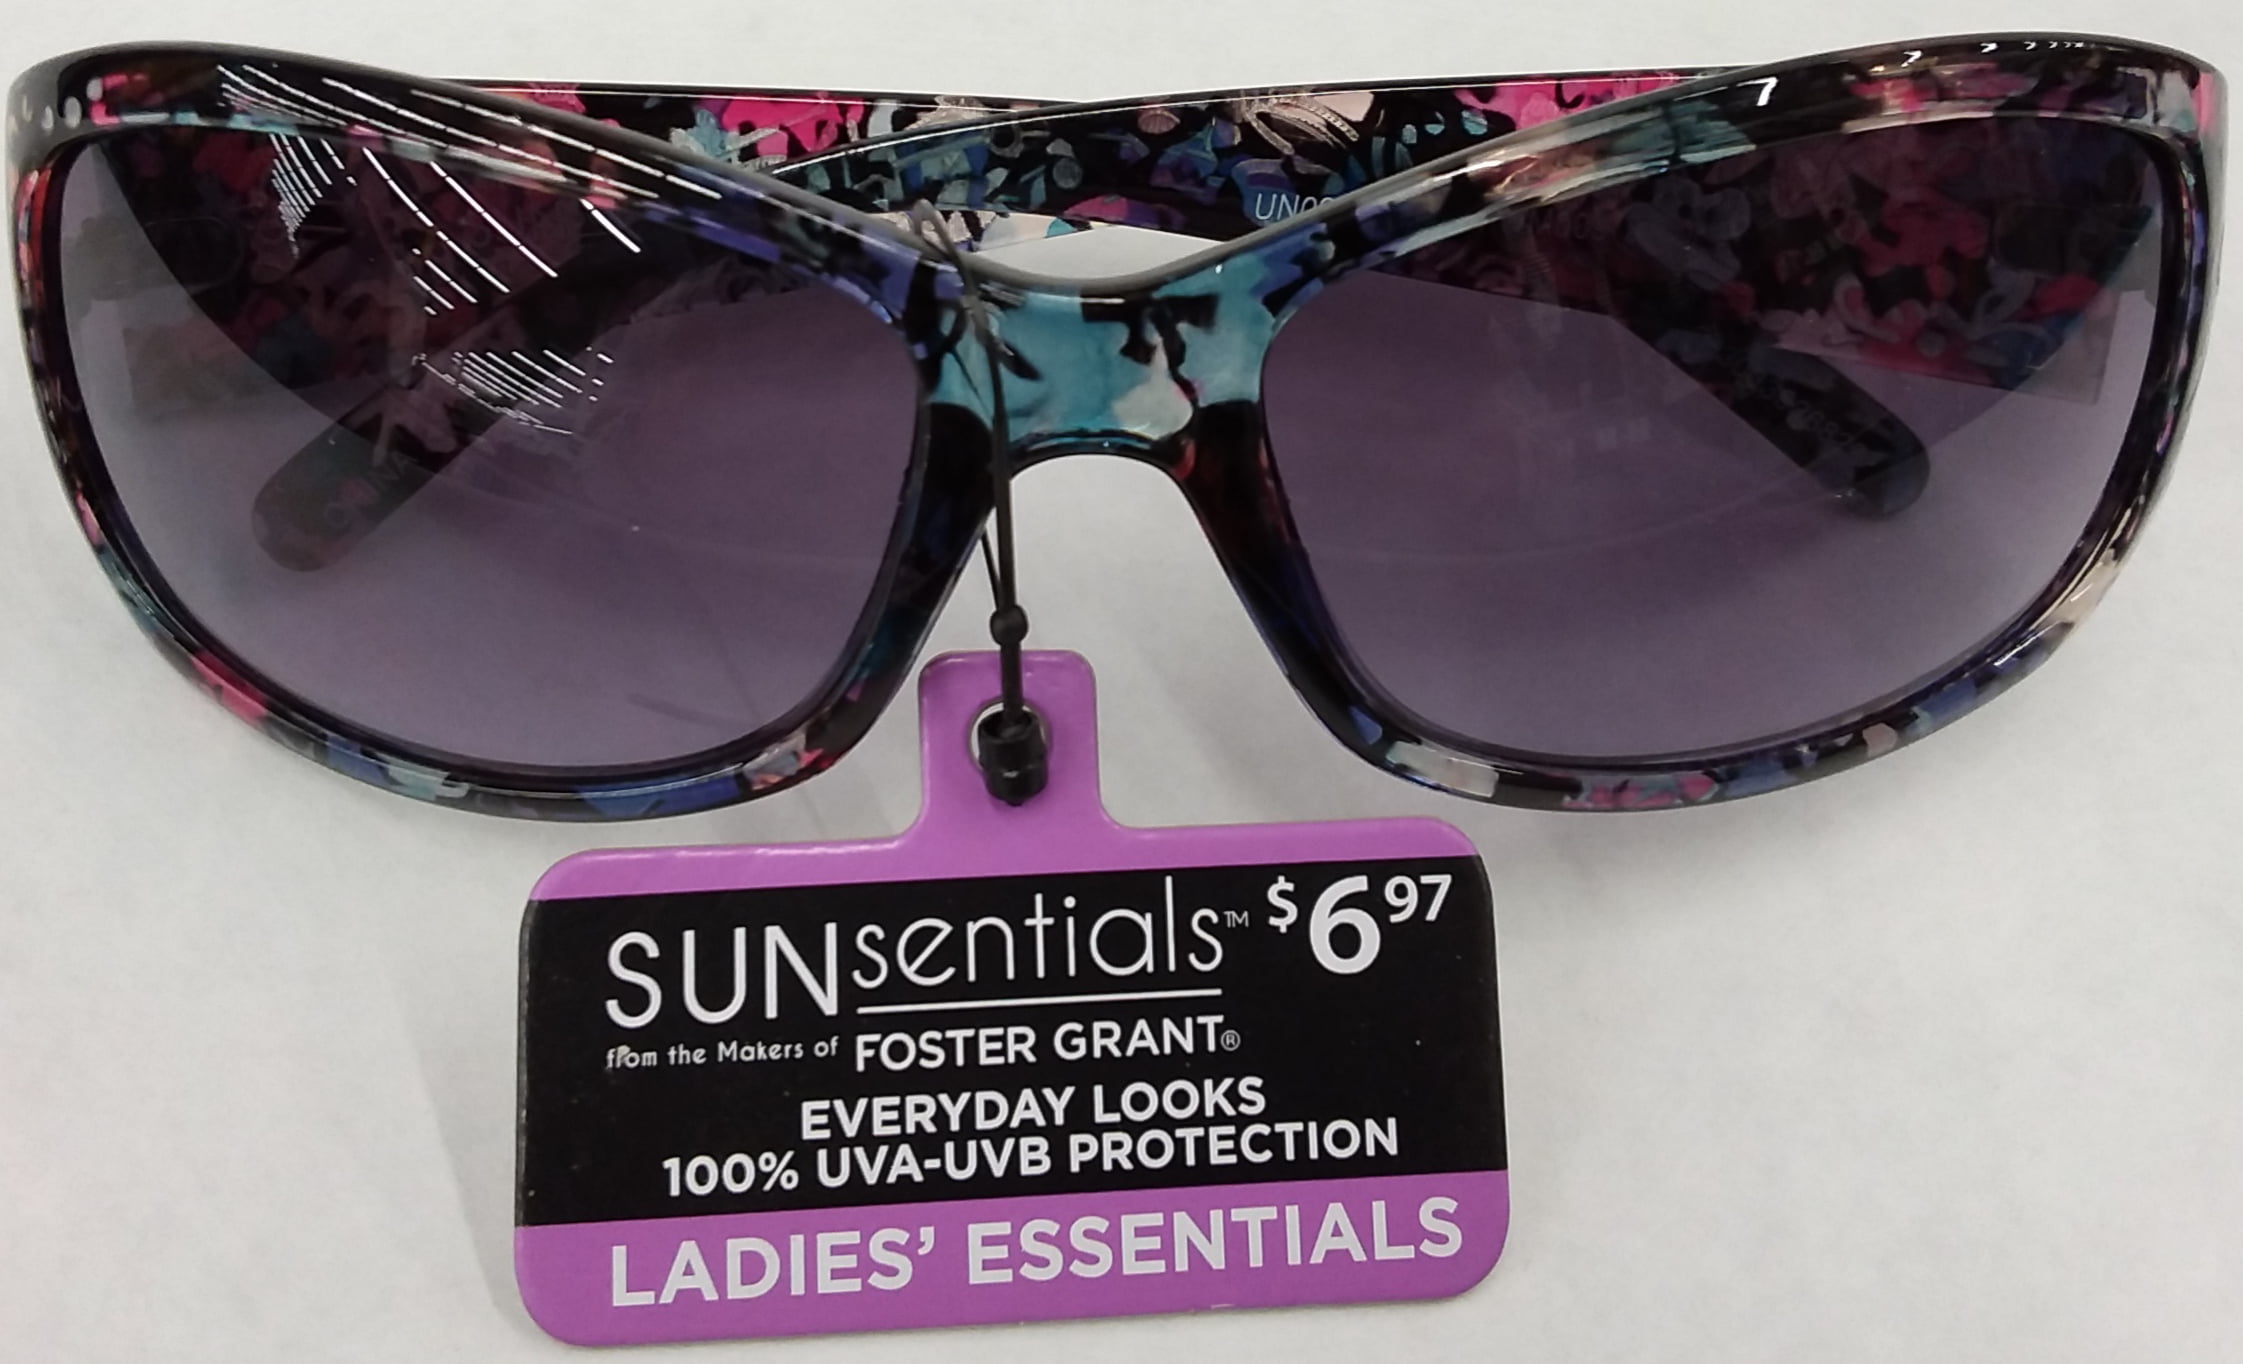 113 100% UVA / UVB Protection Foster Grant Womens Sunglasses 2 PACK 